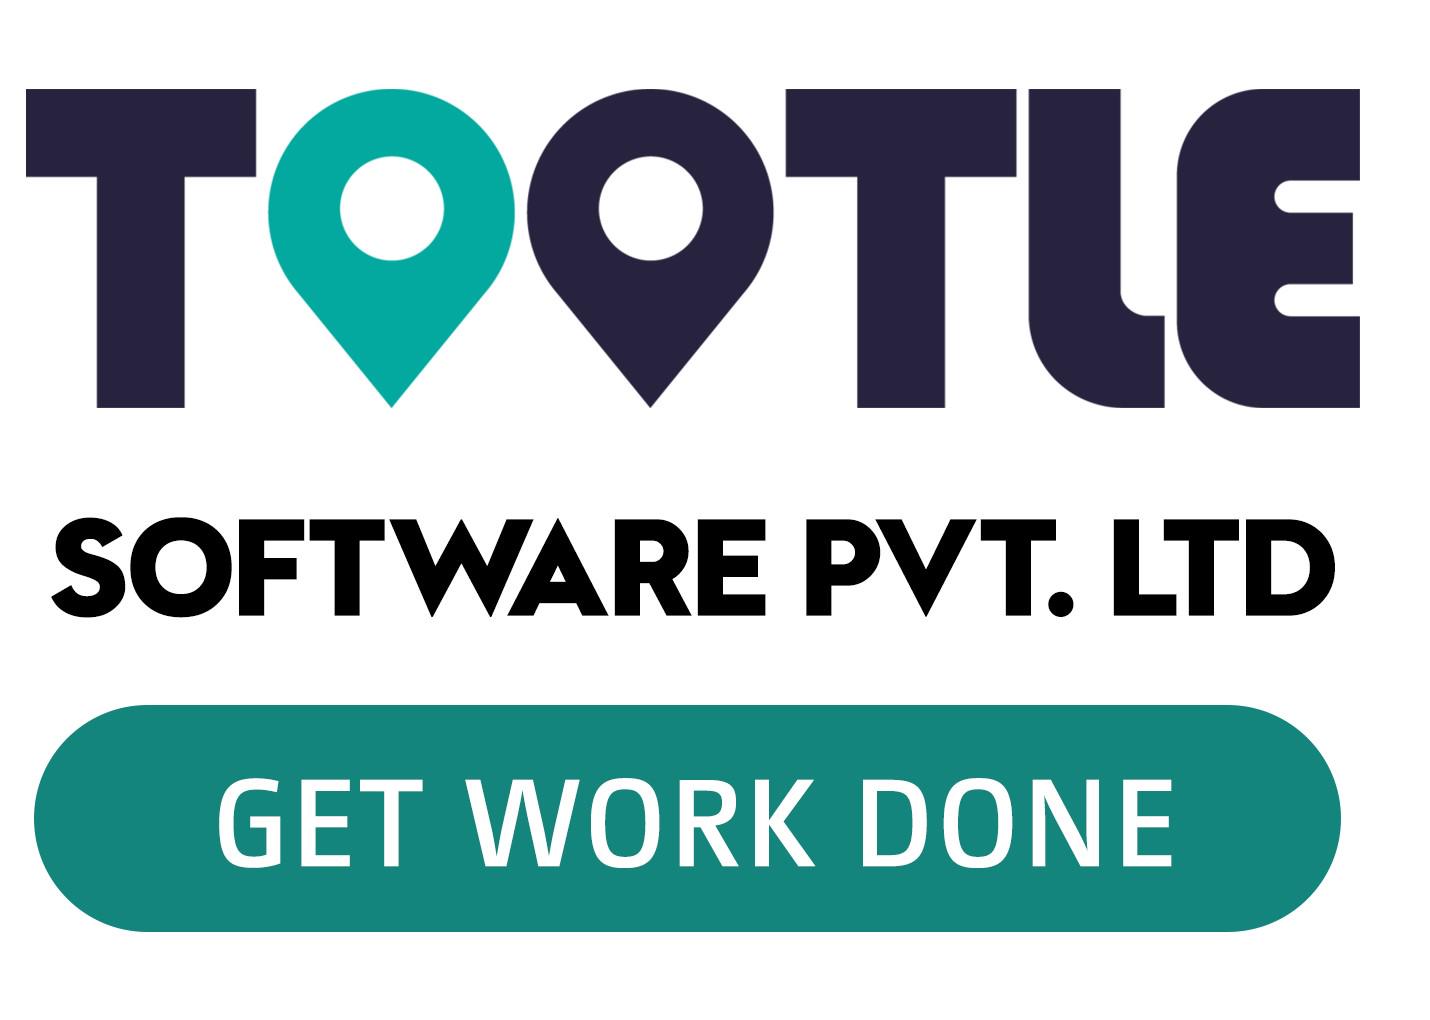 Tootle Software Pvt. Ltd. profile on Qualified.One